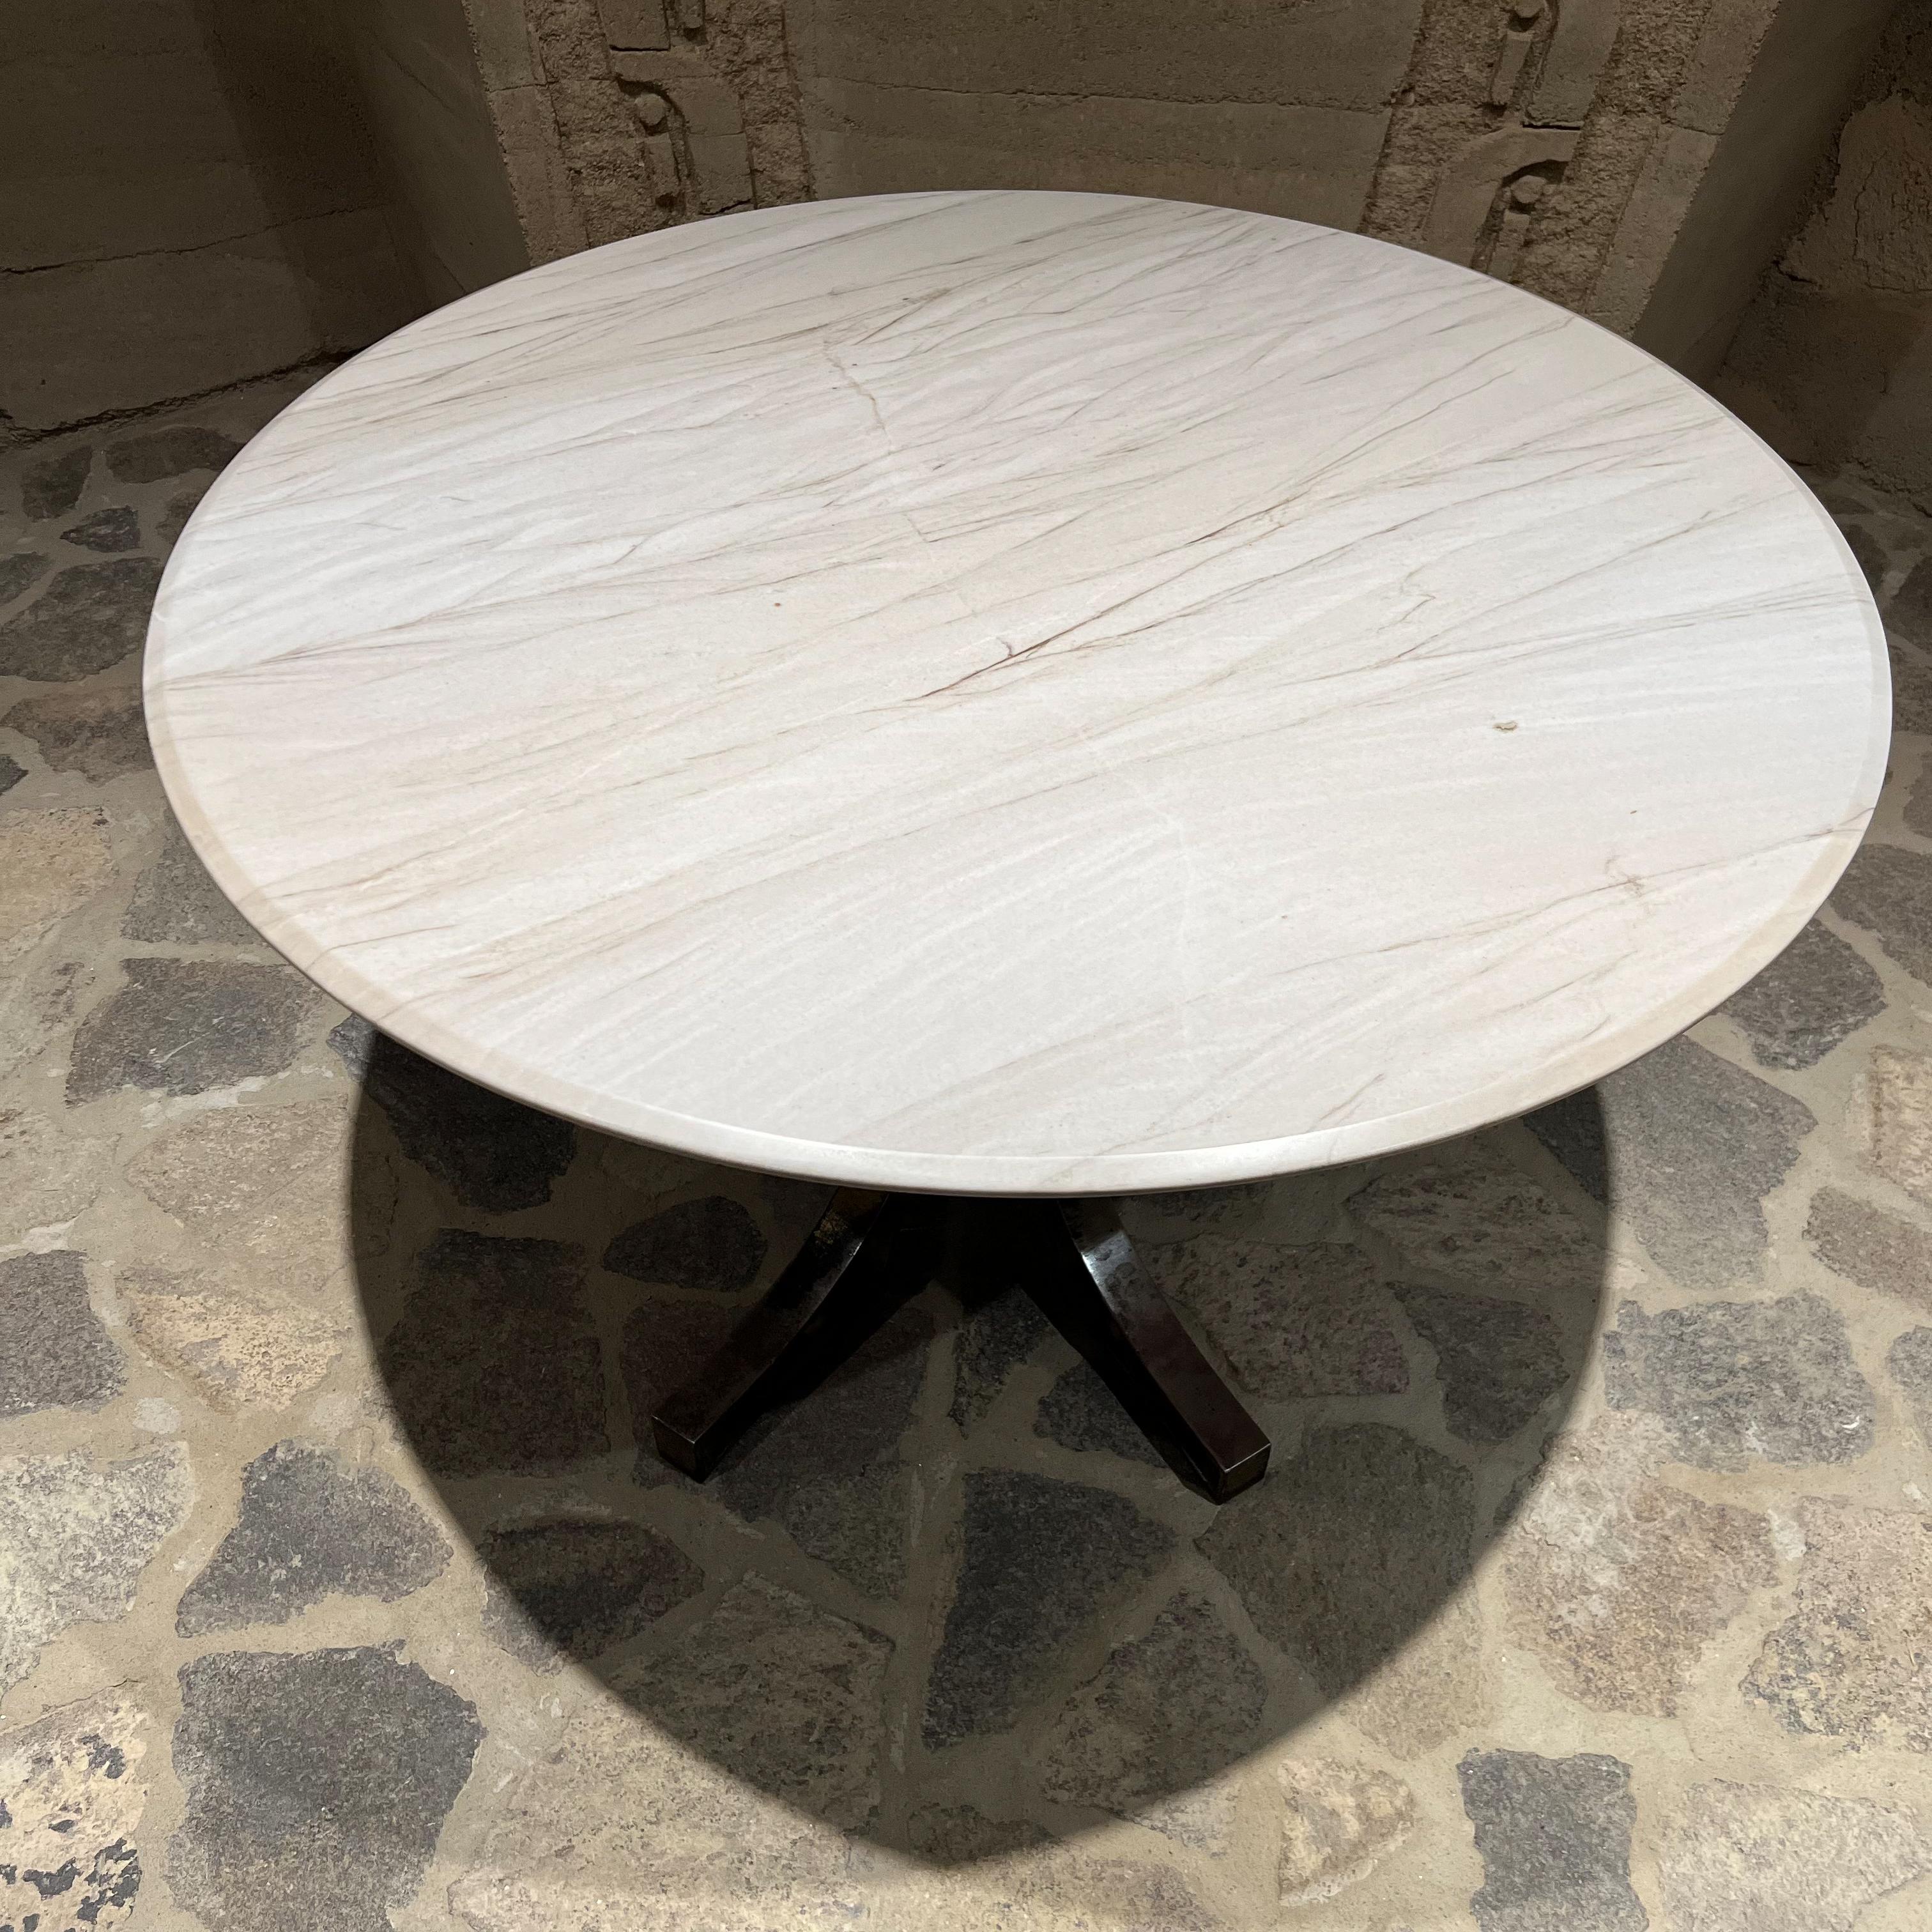 Modernist Dining Table in White Marble Sculptural Base Arturo Pani Mexico City For Sale 1